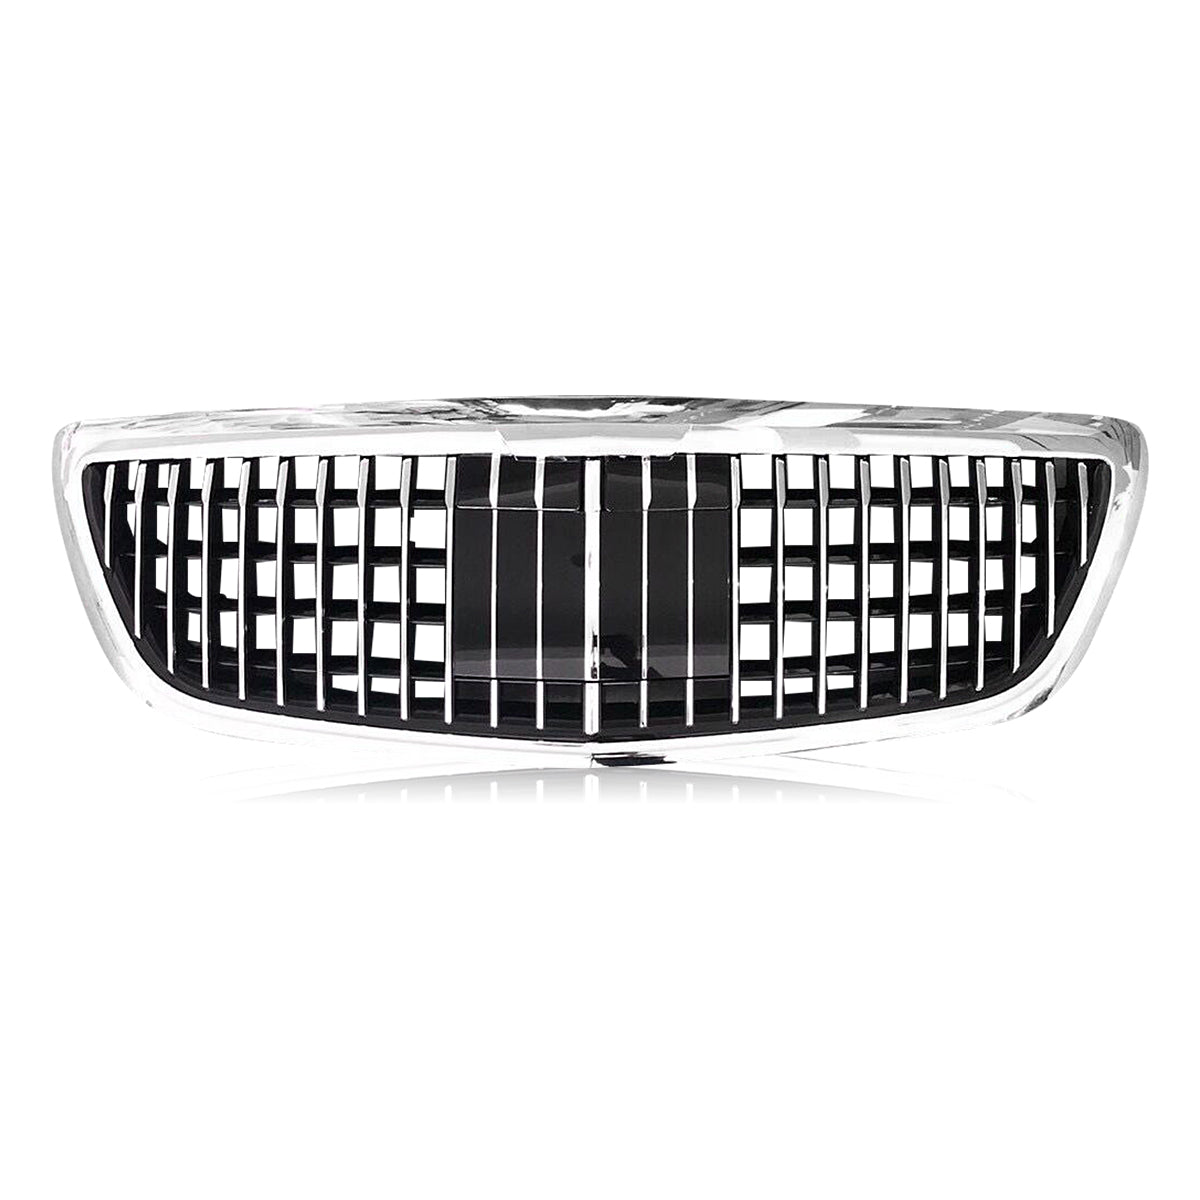 GRILLE FOR S-CLASS W222 14-18 UPGRADE TO 2019 MAYBACH STYLE